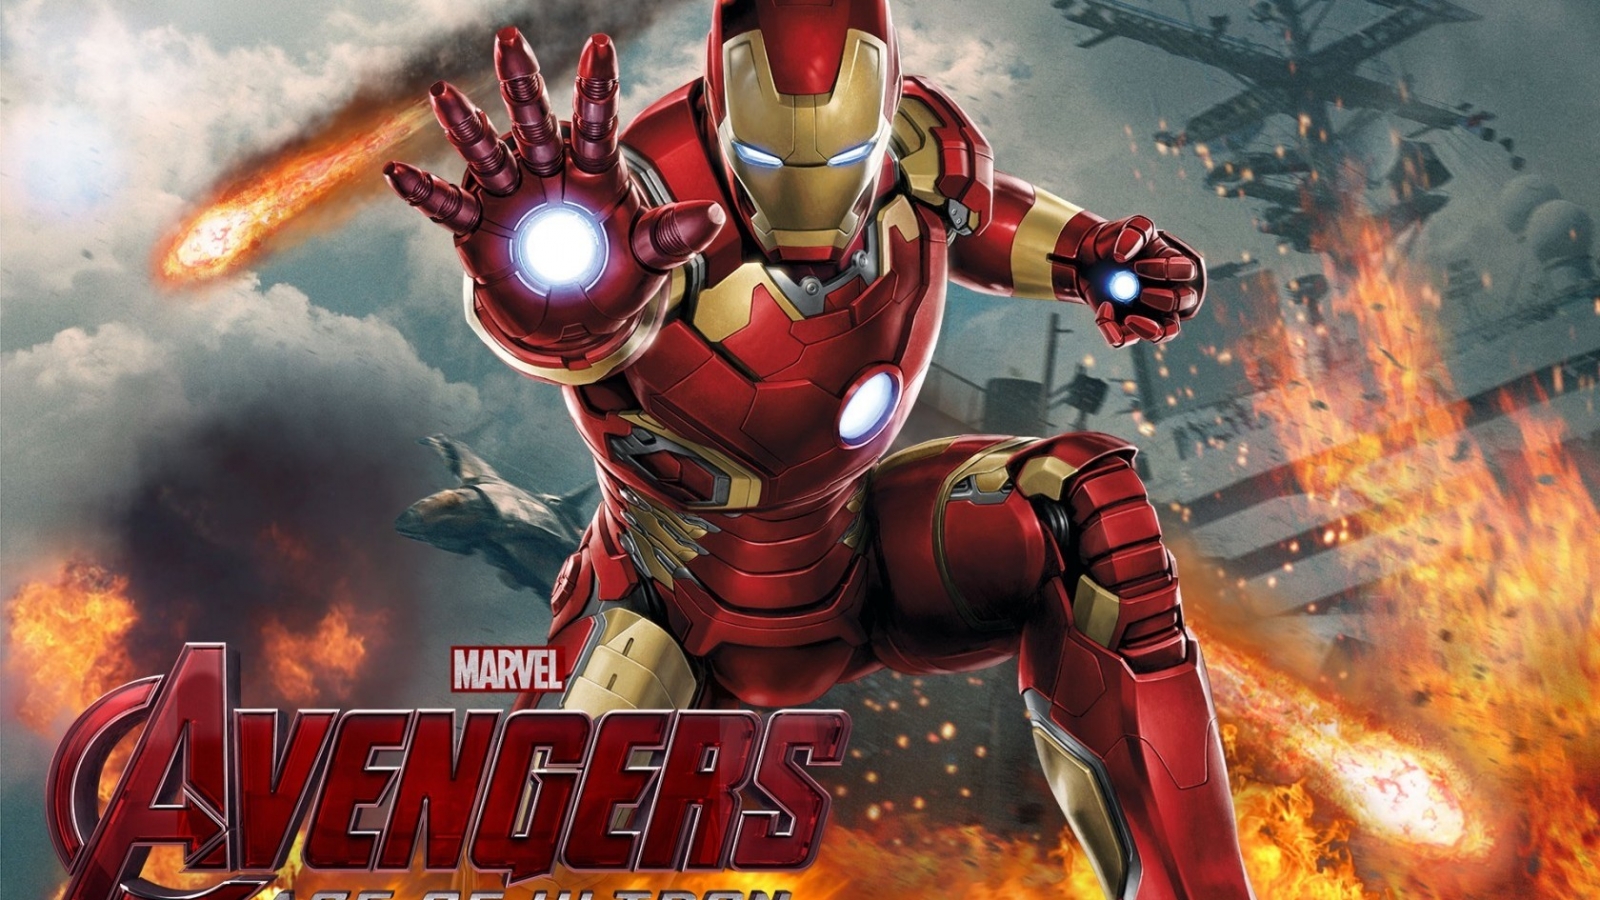 Iron Man The Avengers Movie for 1600 x 900 HDTV resolution